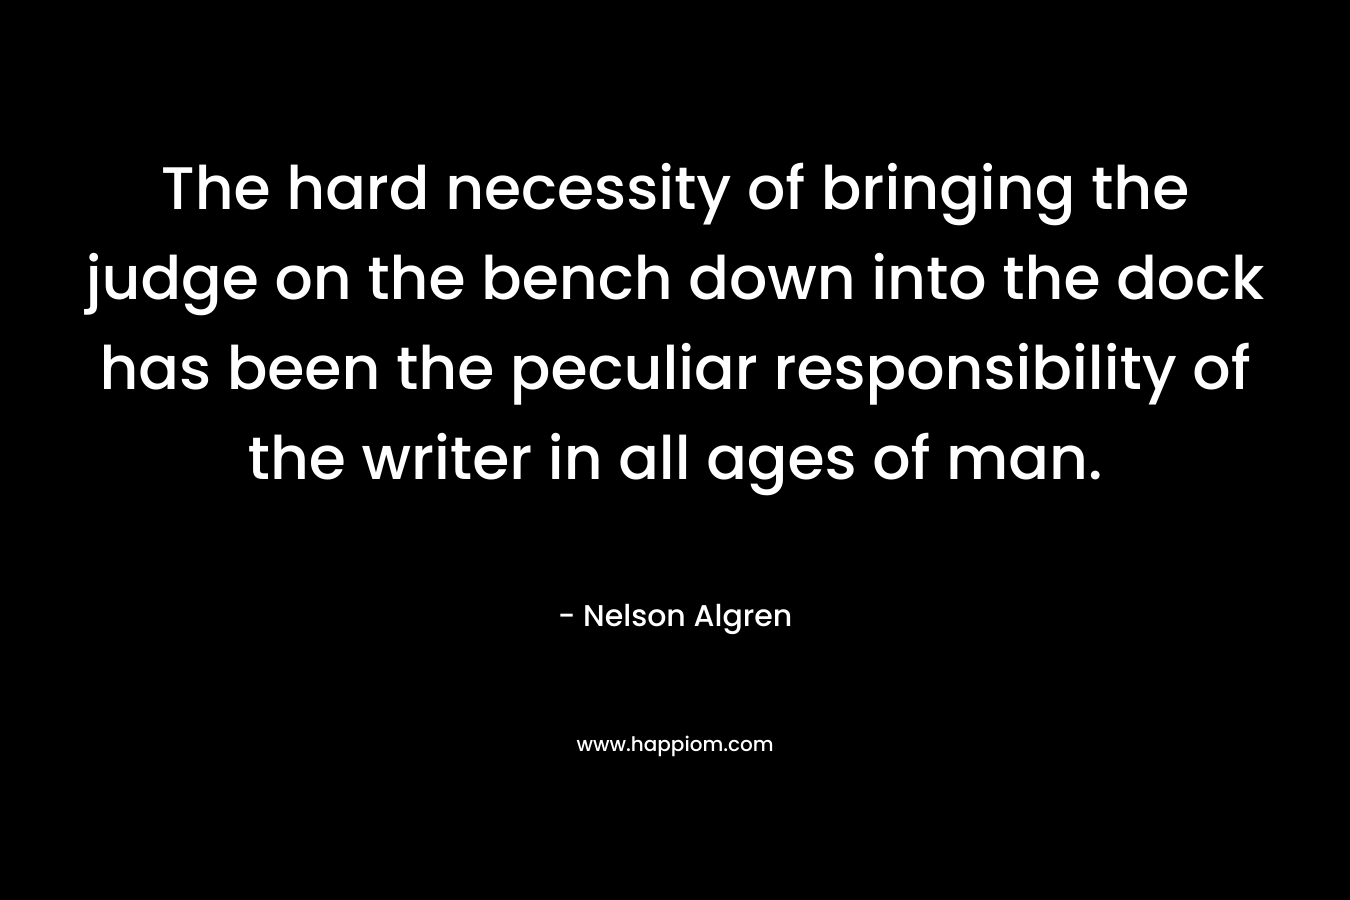 The hard necessity of bringing the judge on the bench down into the dock has been the peculiar responsibility of the writer in all ages of man. – Nelson Algren